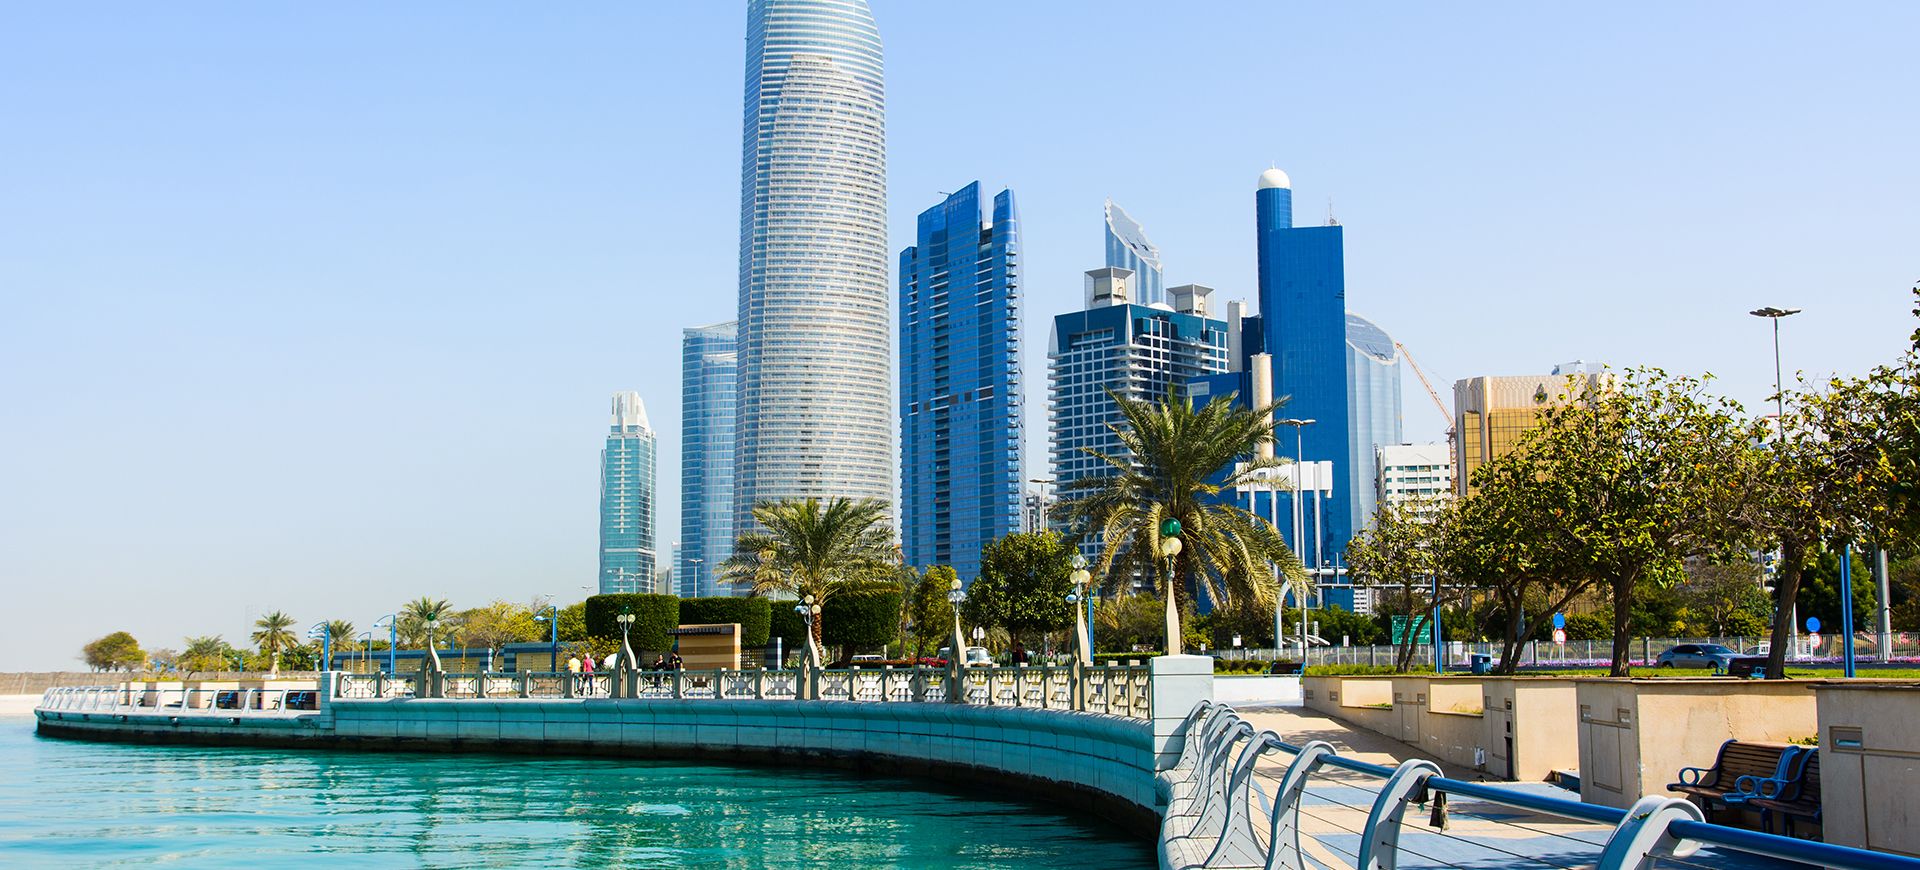 Abu Dhabi Travel Guide Best At Travel The Edit 9275